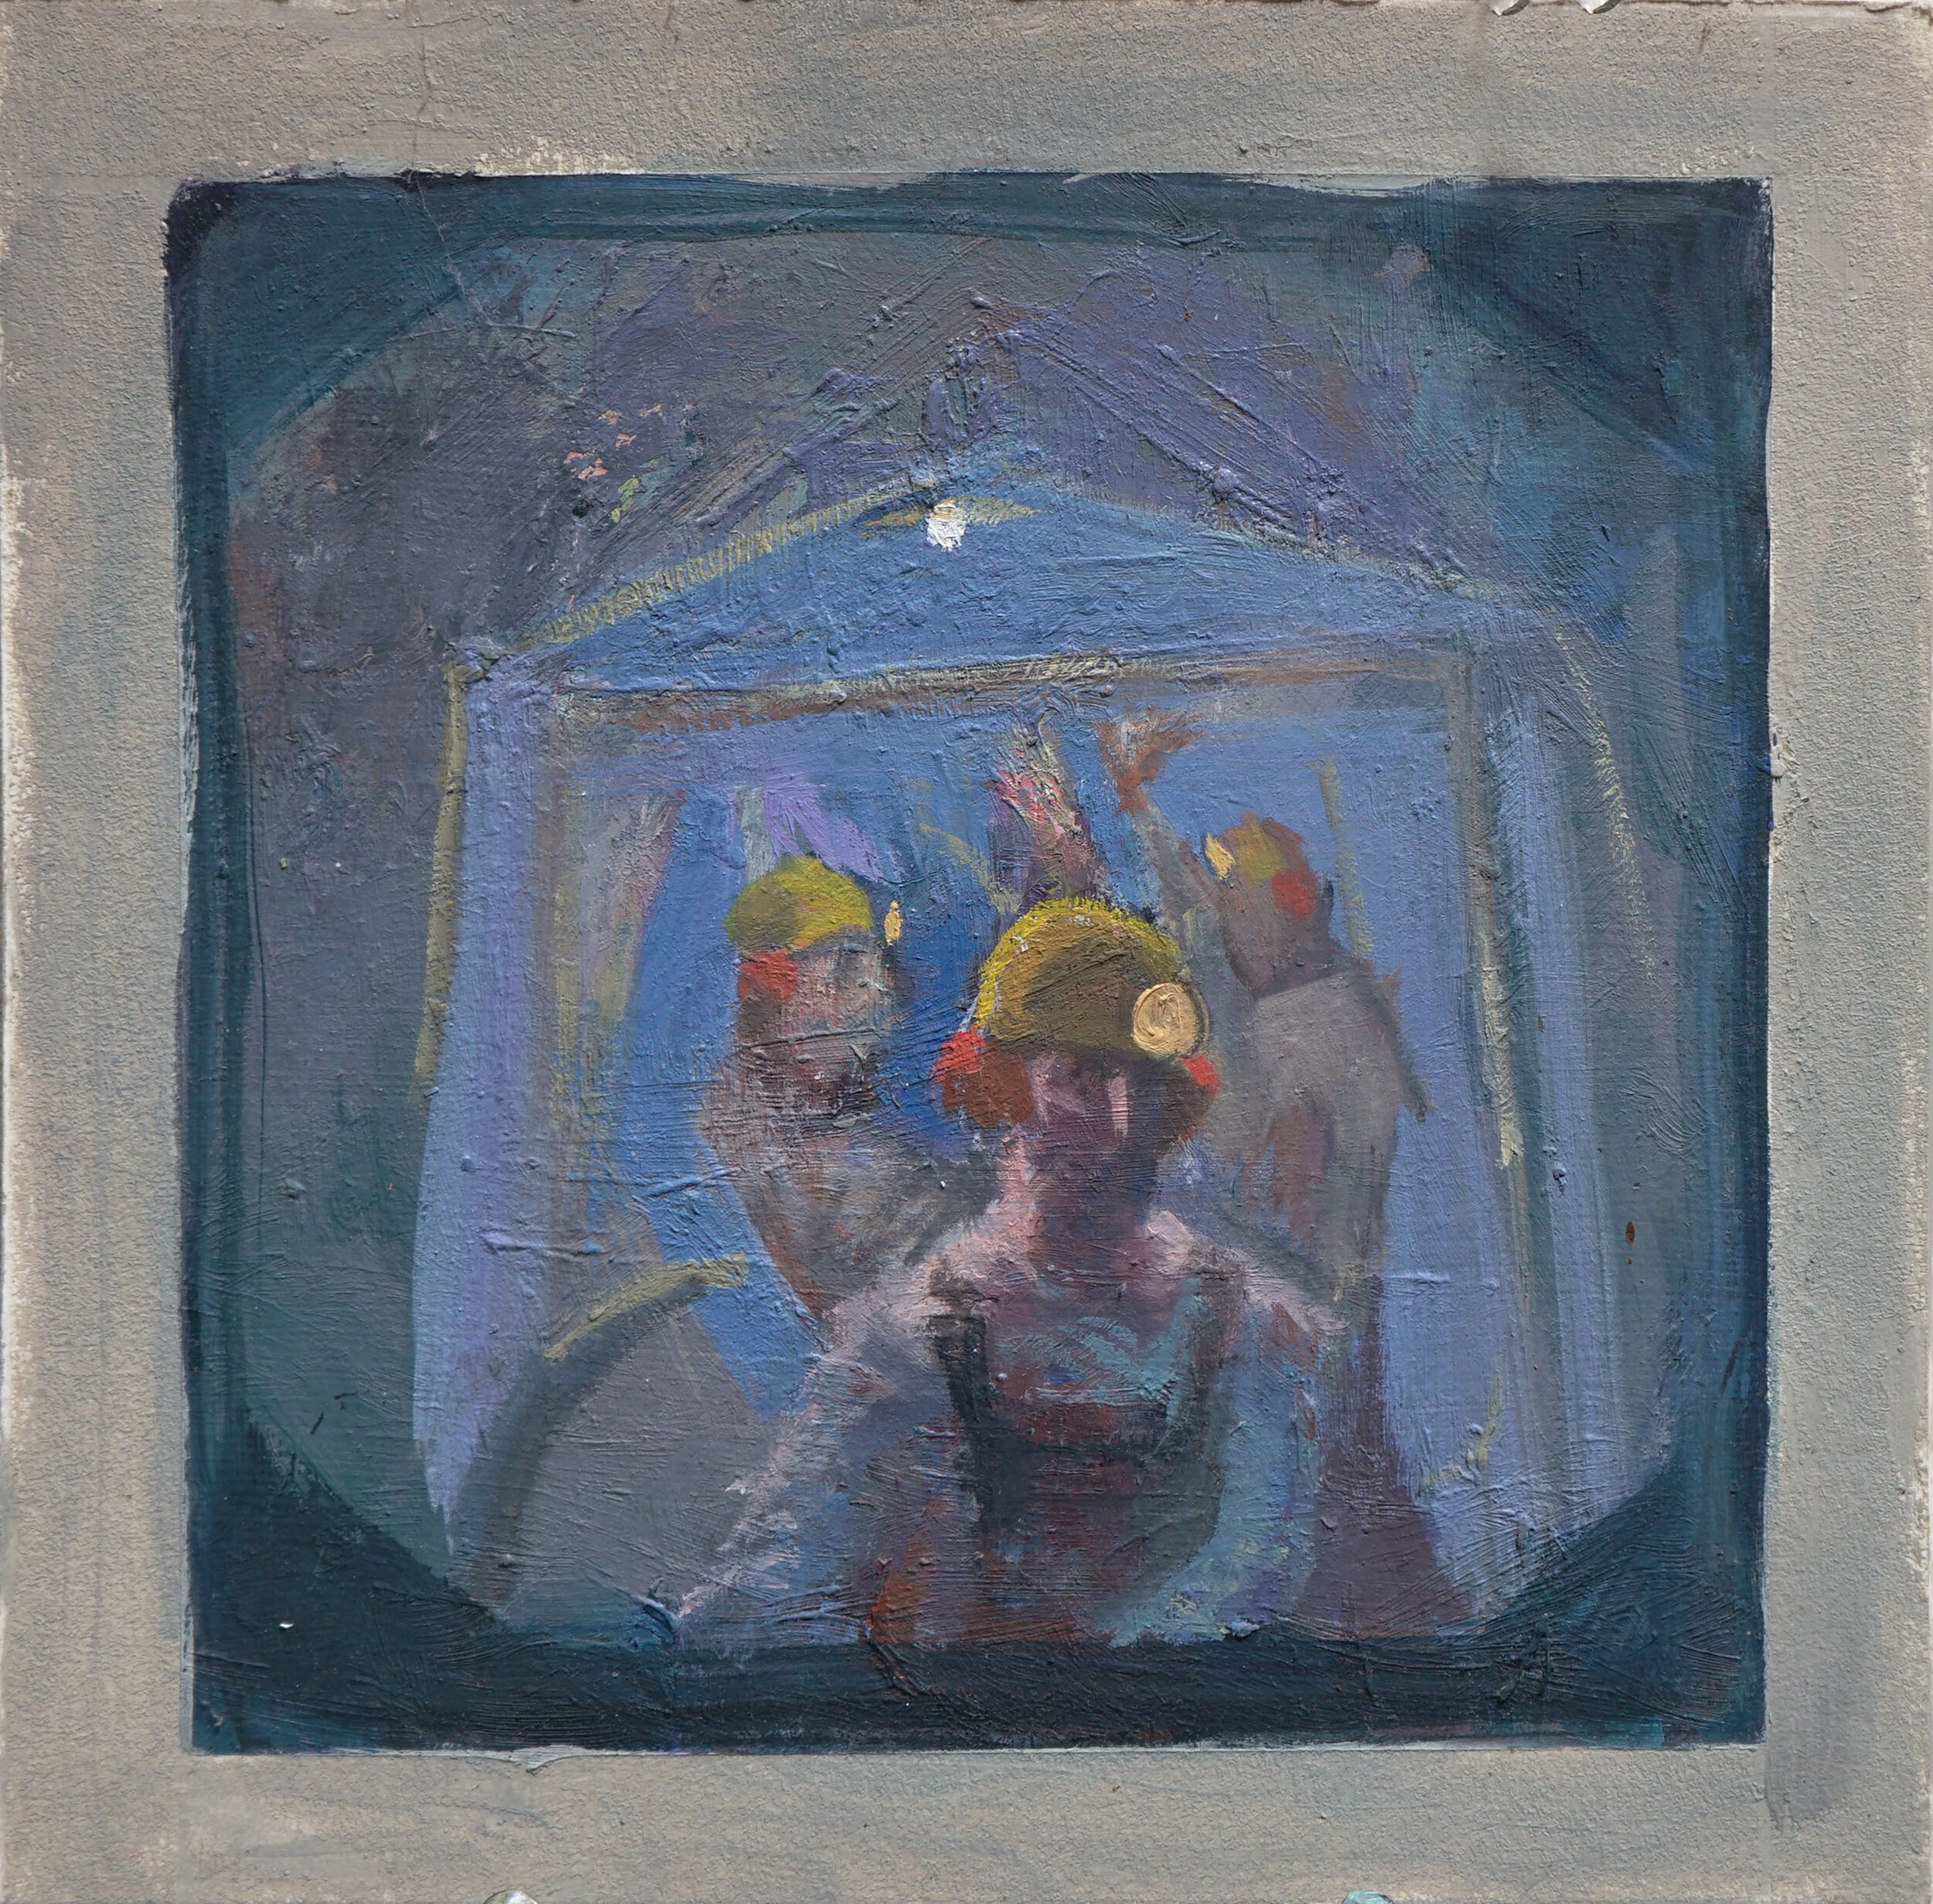 Miners, 8"x8", oil on museum board, 2019